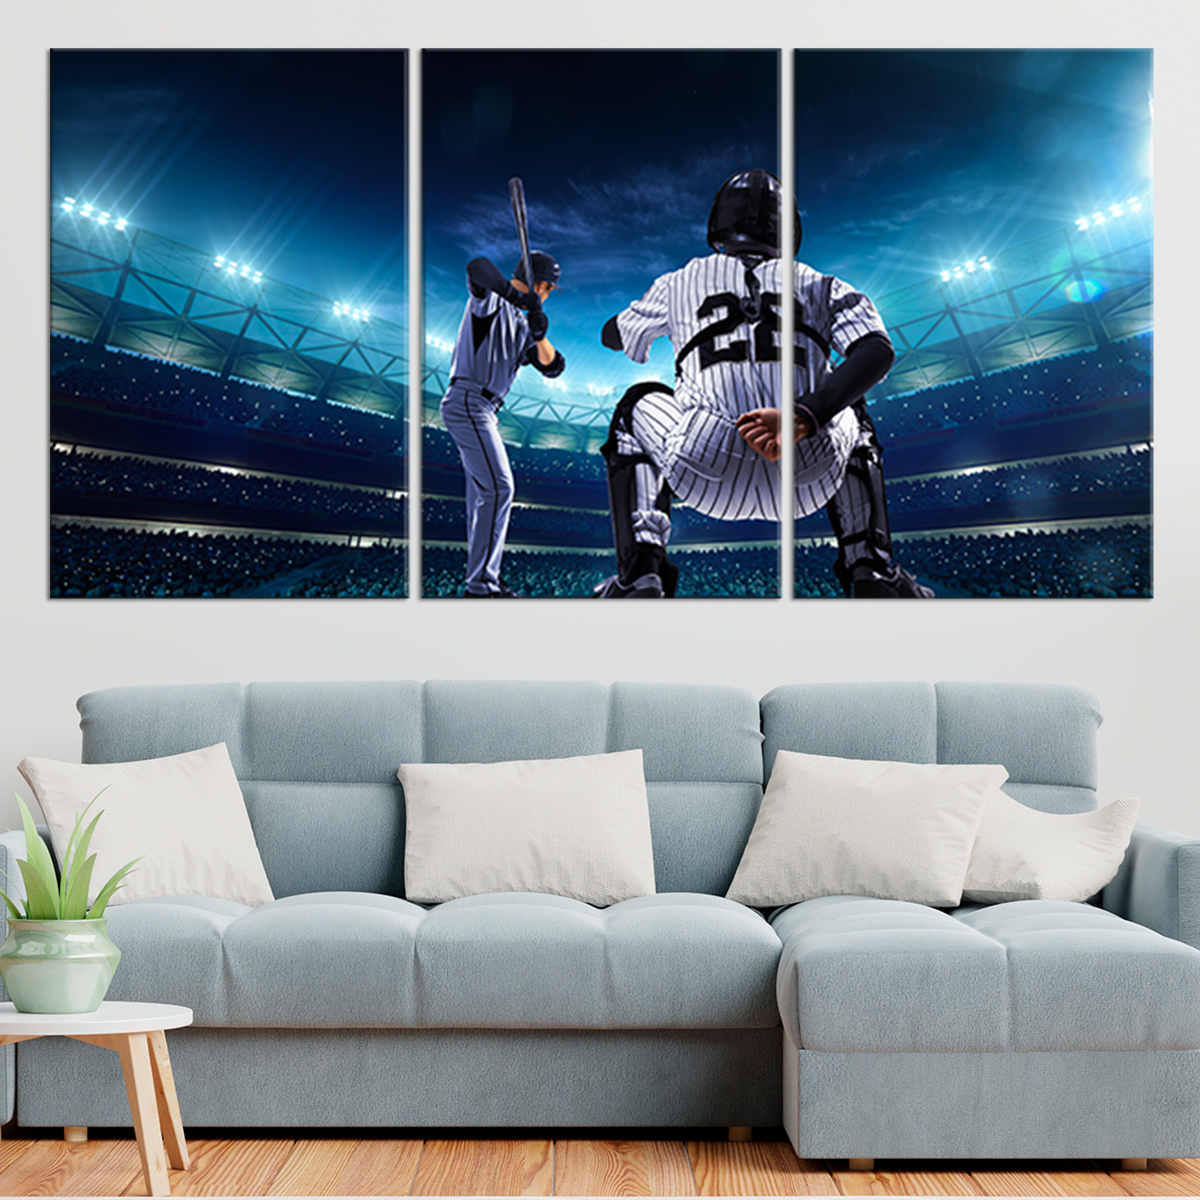 Baseball Game in Arena Canvas Wall Art